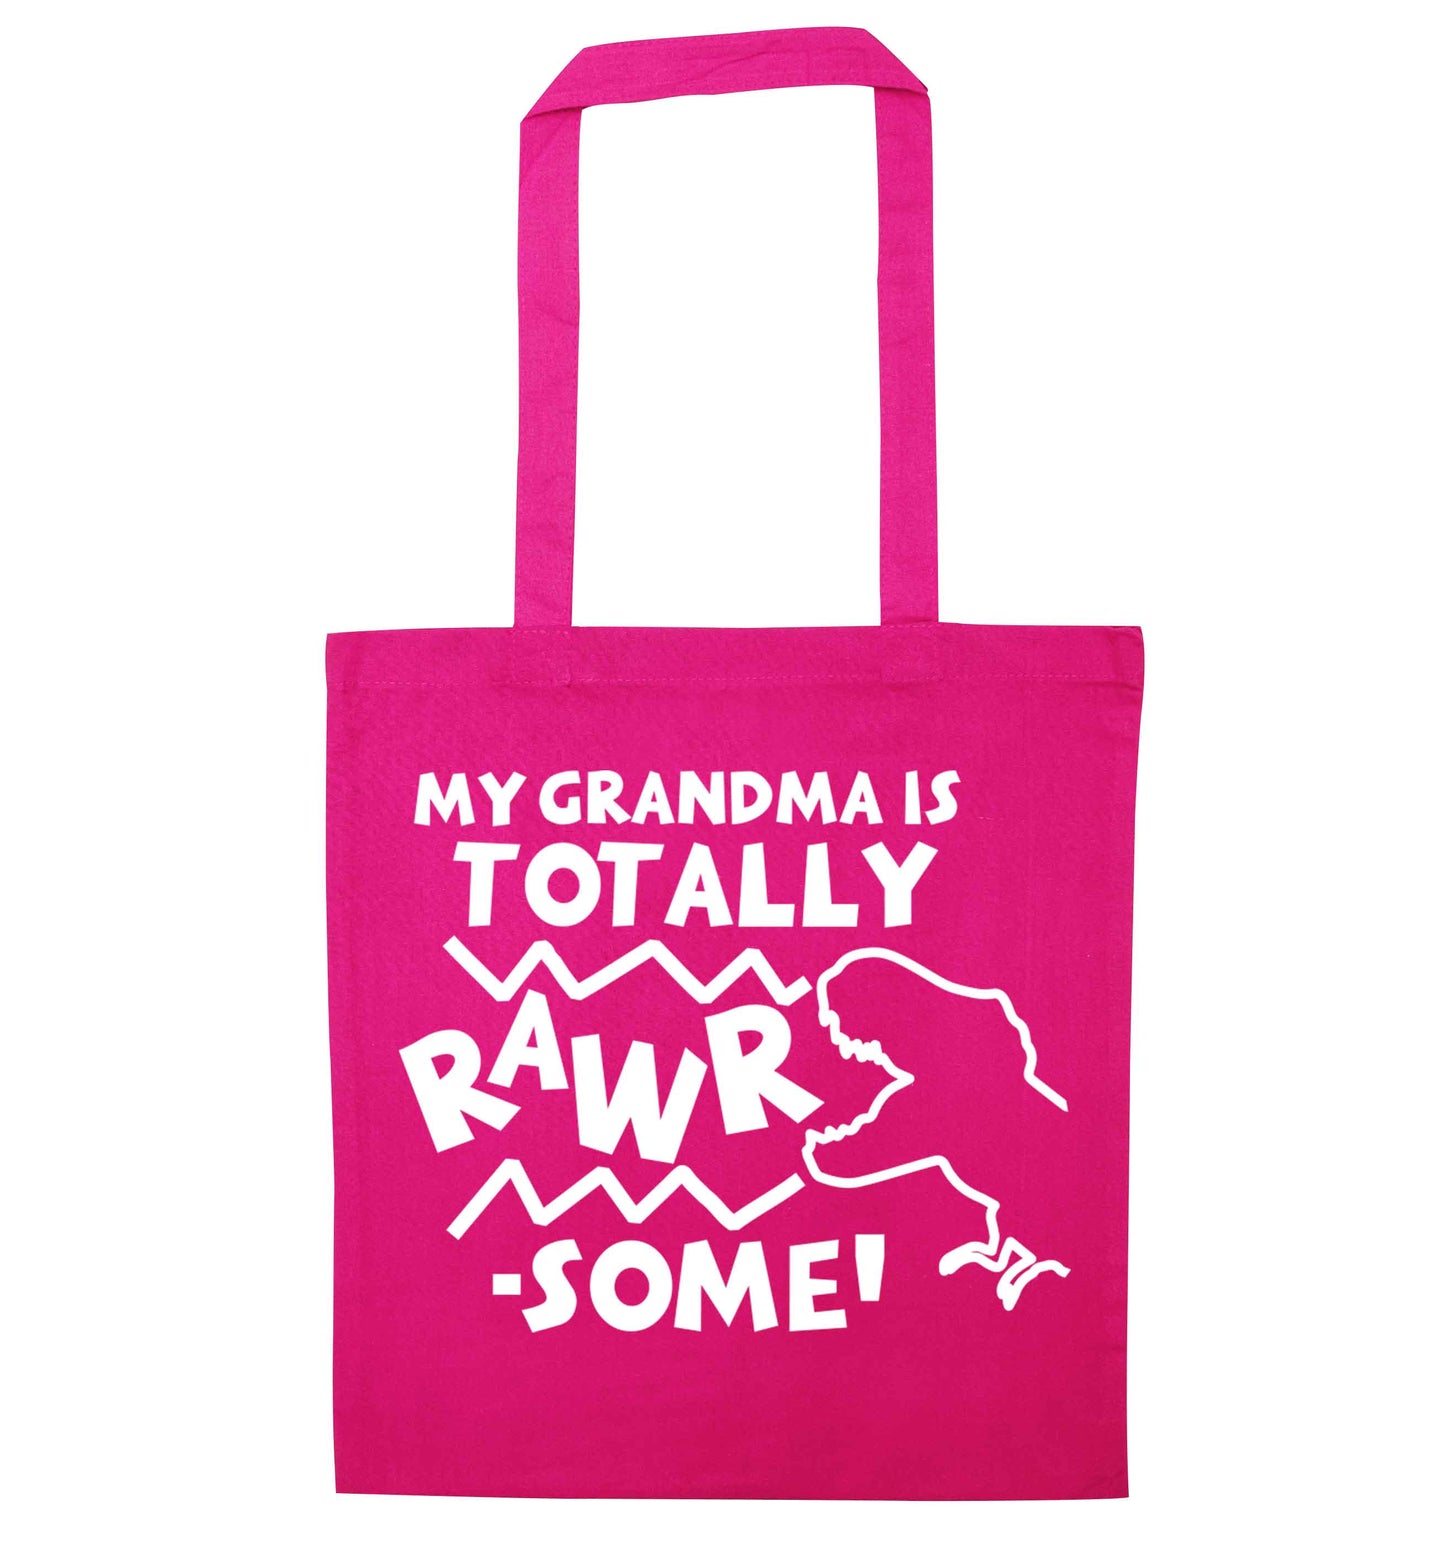 My grandma is totally rawrsome pink tote bag